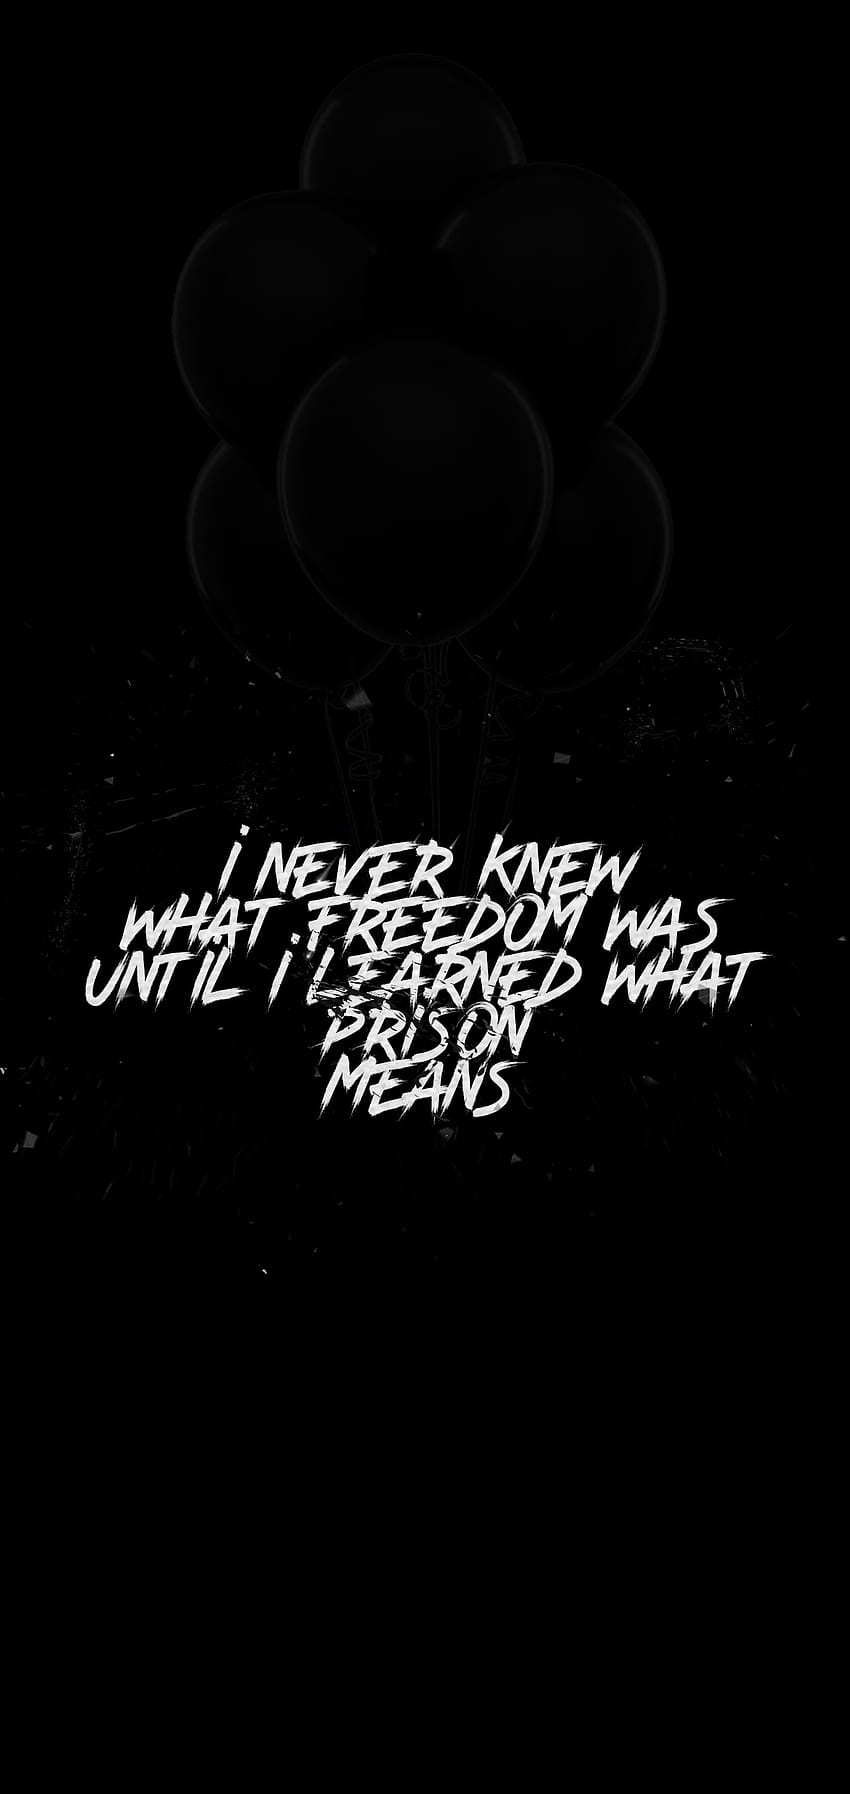 Hey all! Here is an NF i created in hop, i love doing graphic design and NF even more! I used a quote i saw on this subreddit that someone had, nf just like you HD phone wallpaper